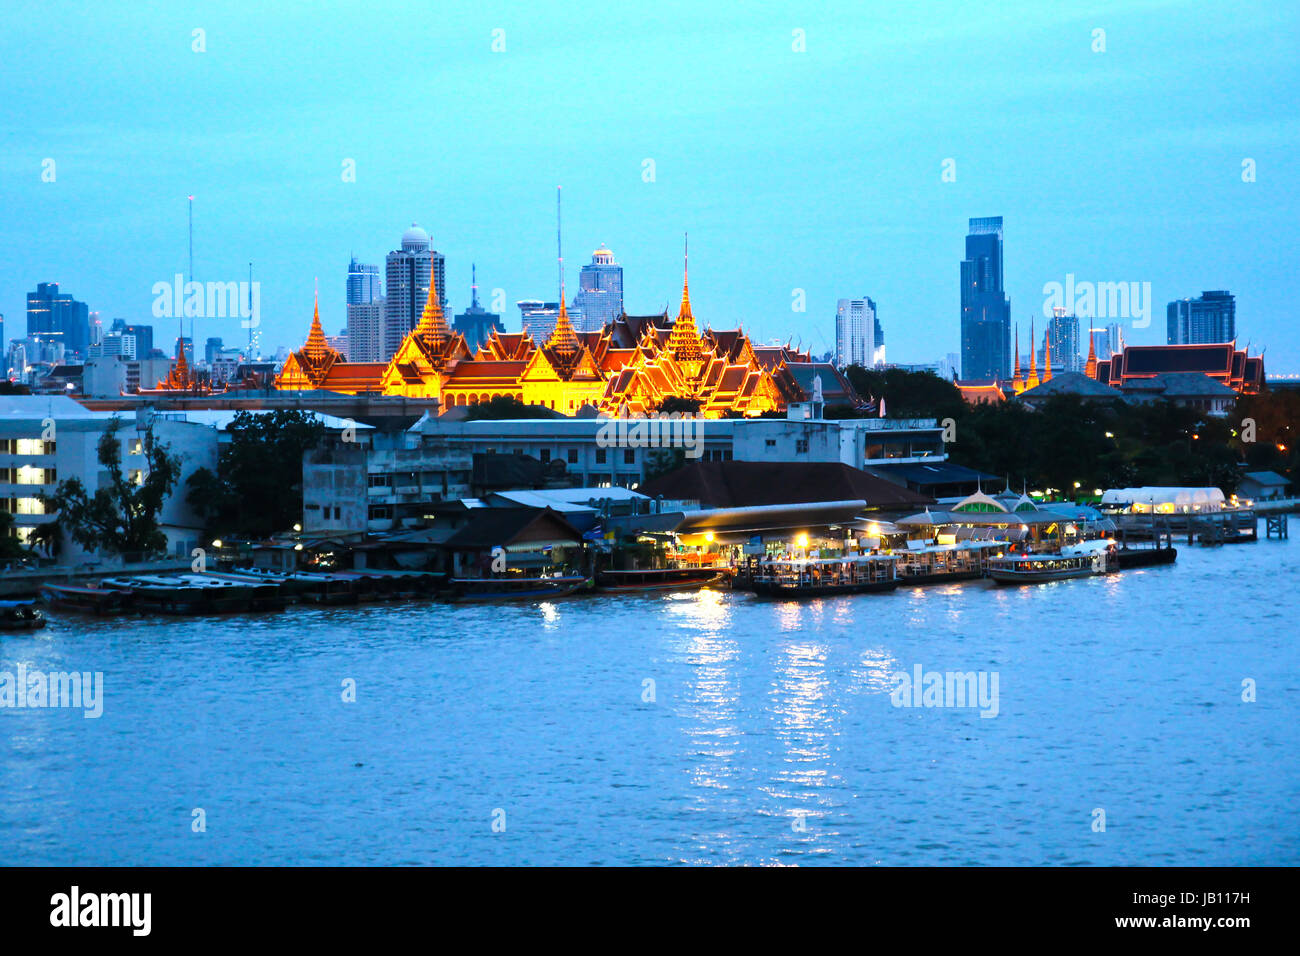 Aerial view of Grand palace with Chao Phraya river at night Stock Photo